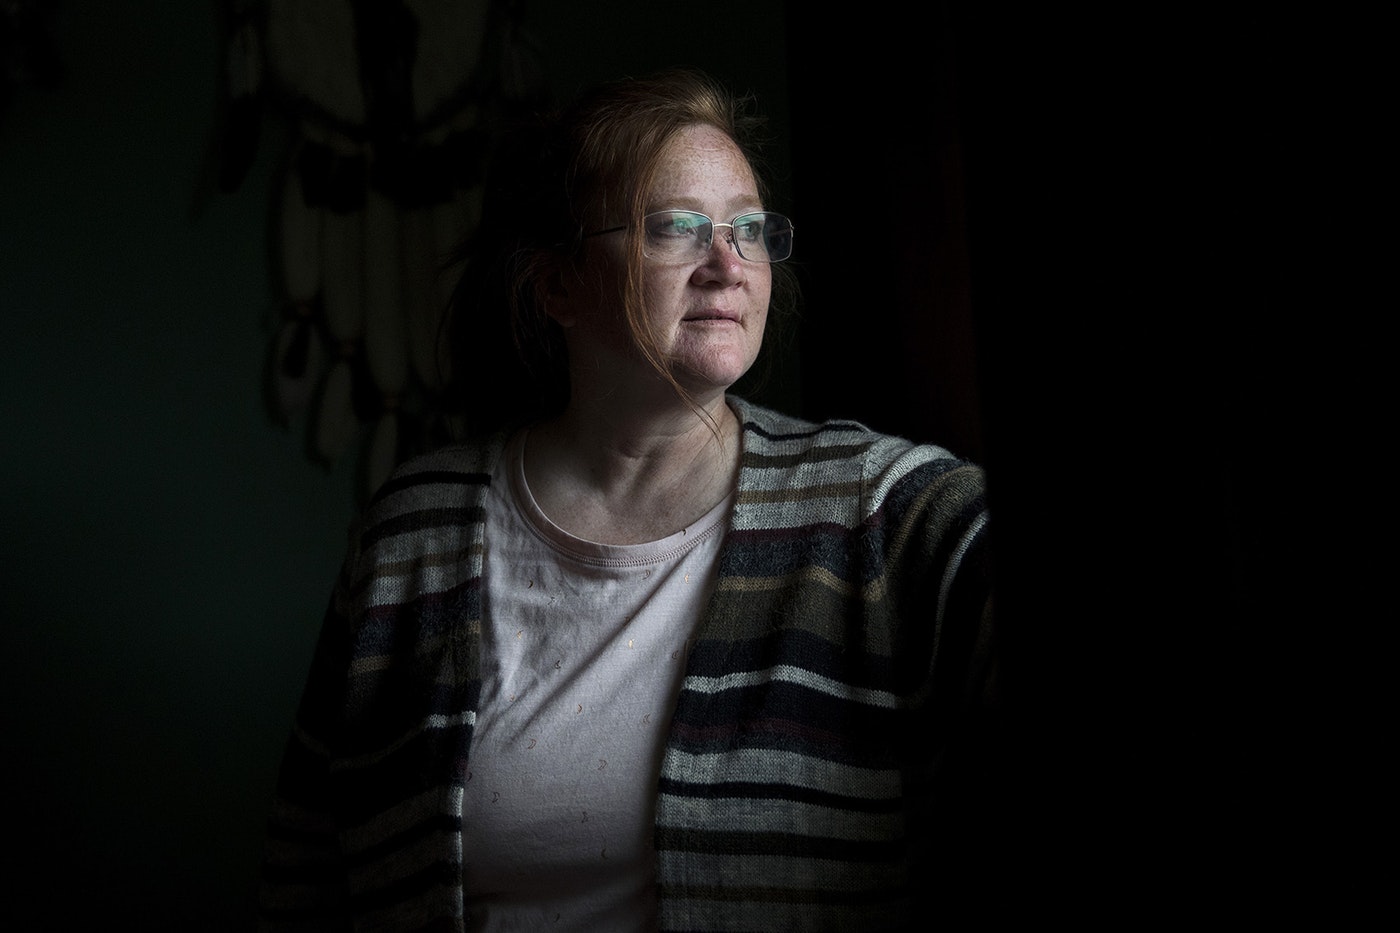 Elise Walker poses for a portrait on Monday, April 22, 2019, at her home along Old Highway 97 in Okanogan. CREDIT: KUOW PHOTO/MEGAN FARMER